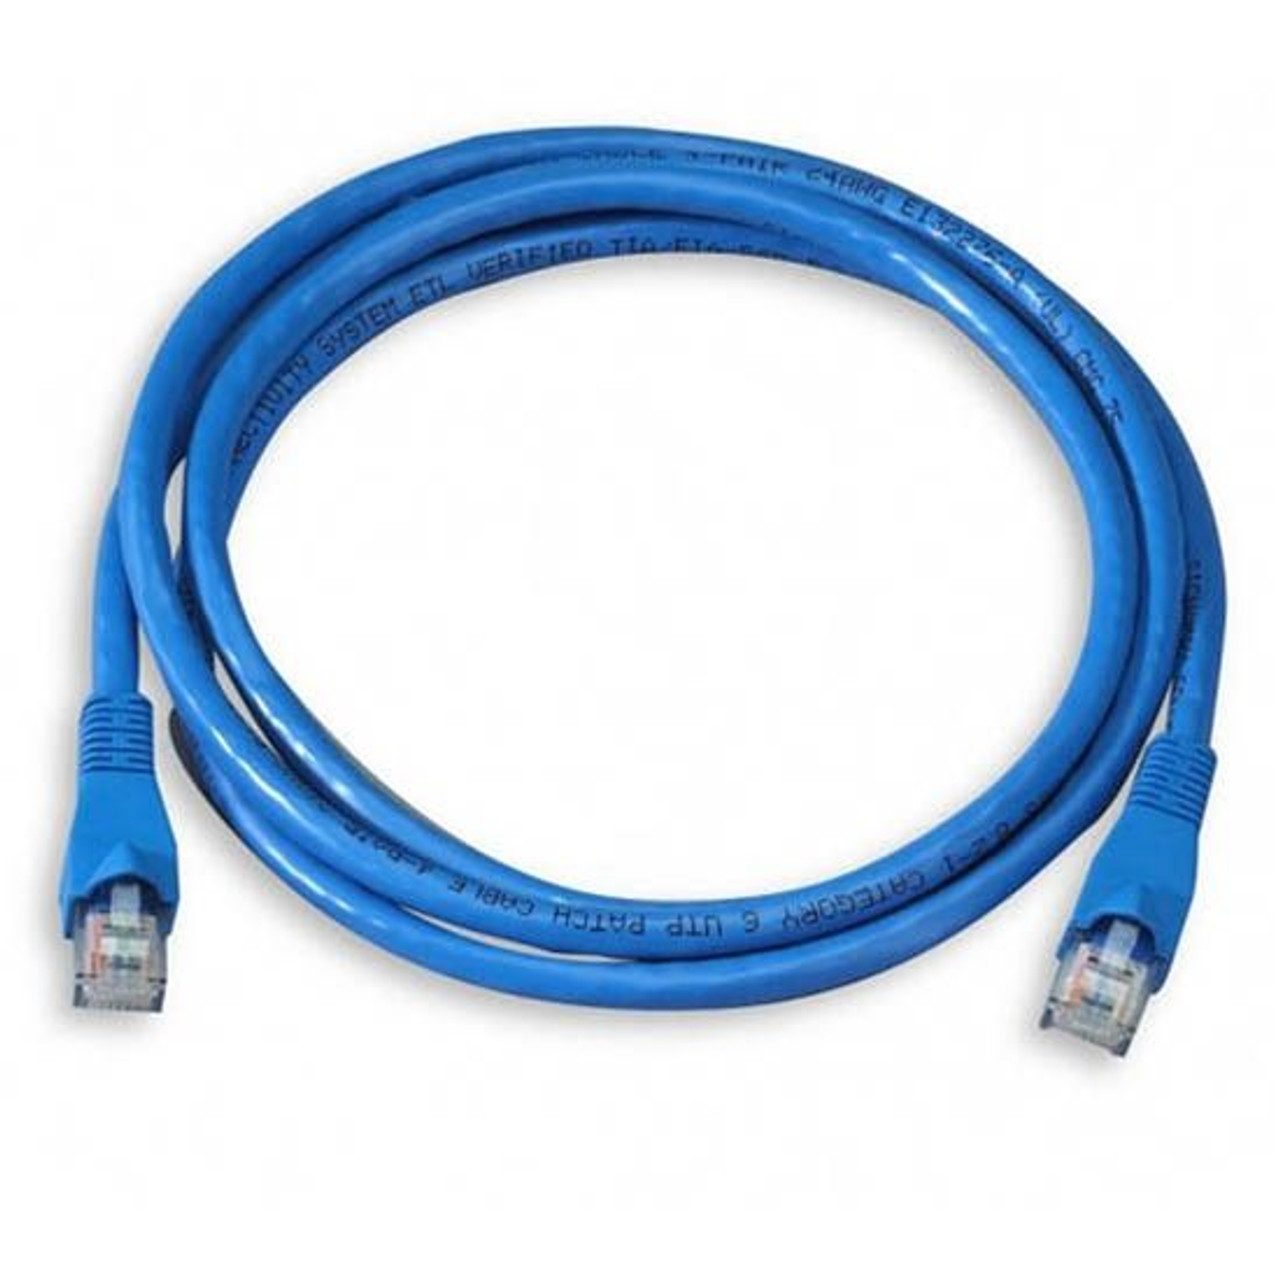 Eagle 5 Ft CAT6 Patch Cord Cable Blue Snagless Ethernet  24 AWG Copper Network RJ45 Plug Each End UTP Booted Snagless High Performance Data Fast Media 550 MHz CAT6 RJ-45